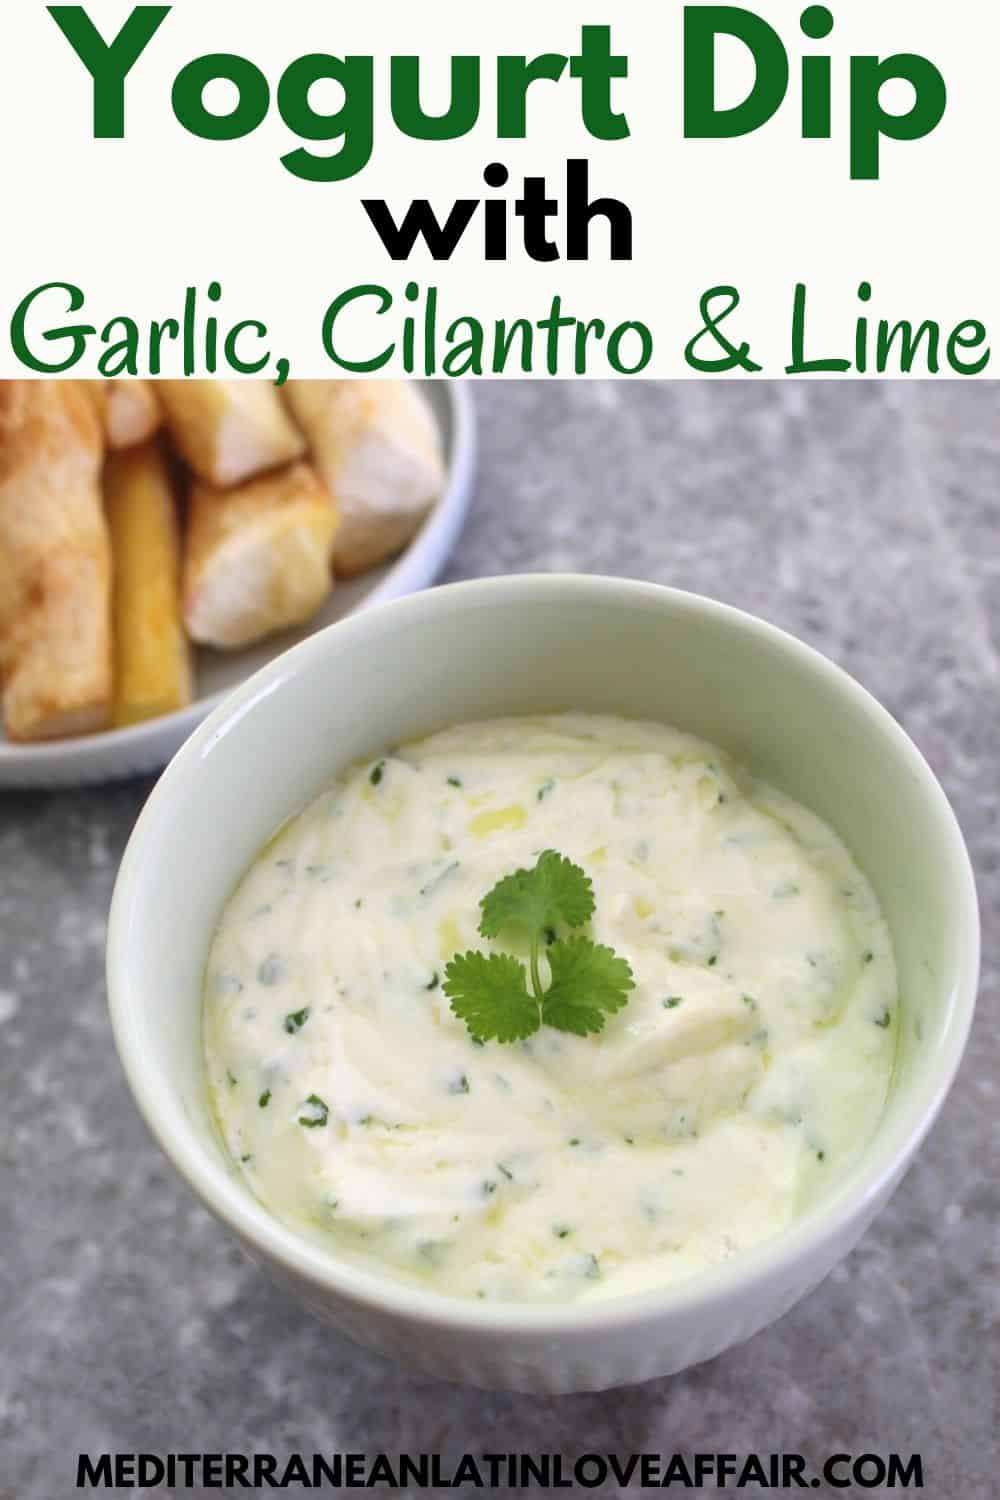 Picture shows a yogurt based dip with cilantro in the front and some fried yucca in the background.